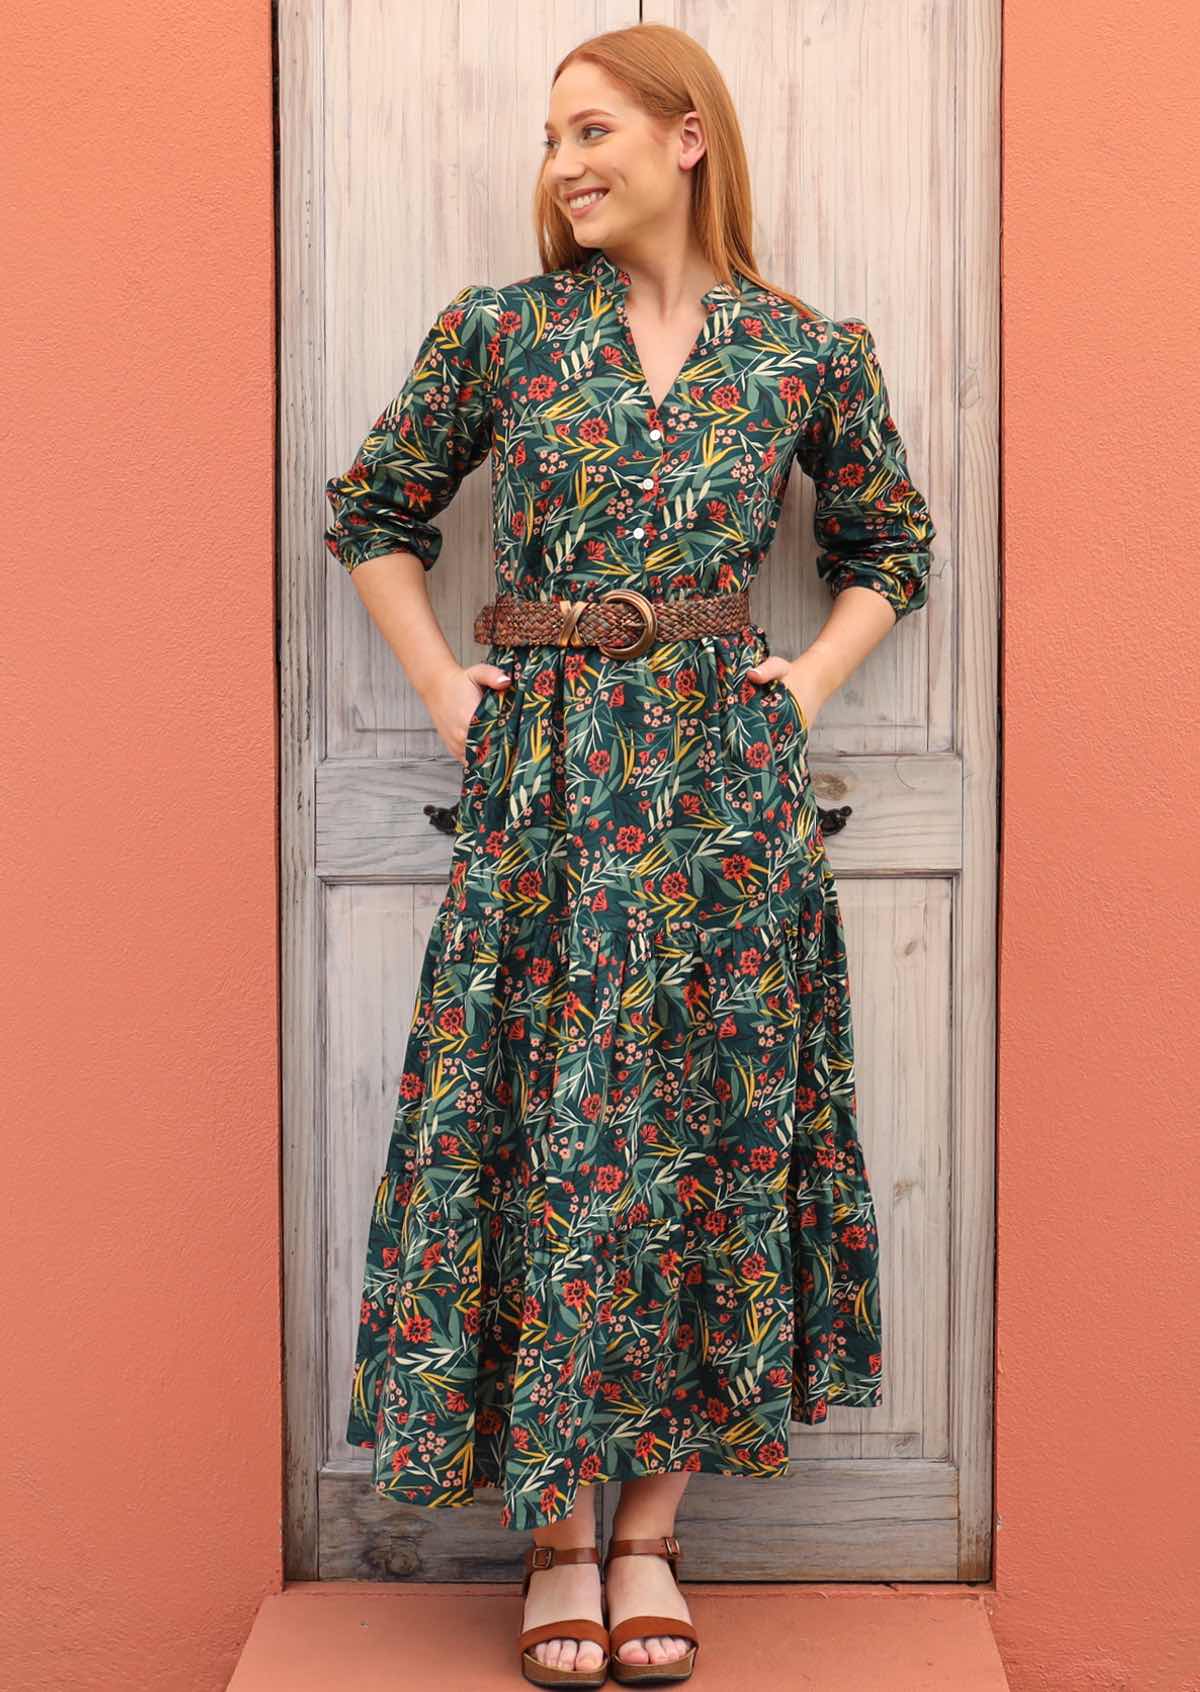 Model stands with her hands in the pockets of her green based, floral print dress. 